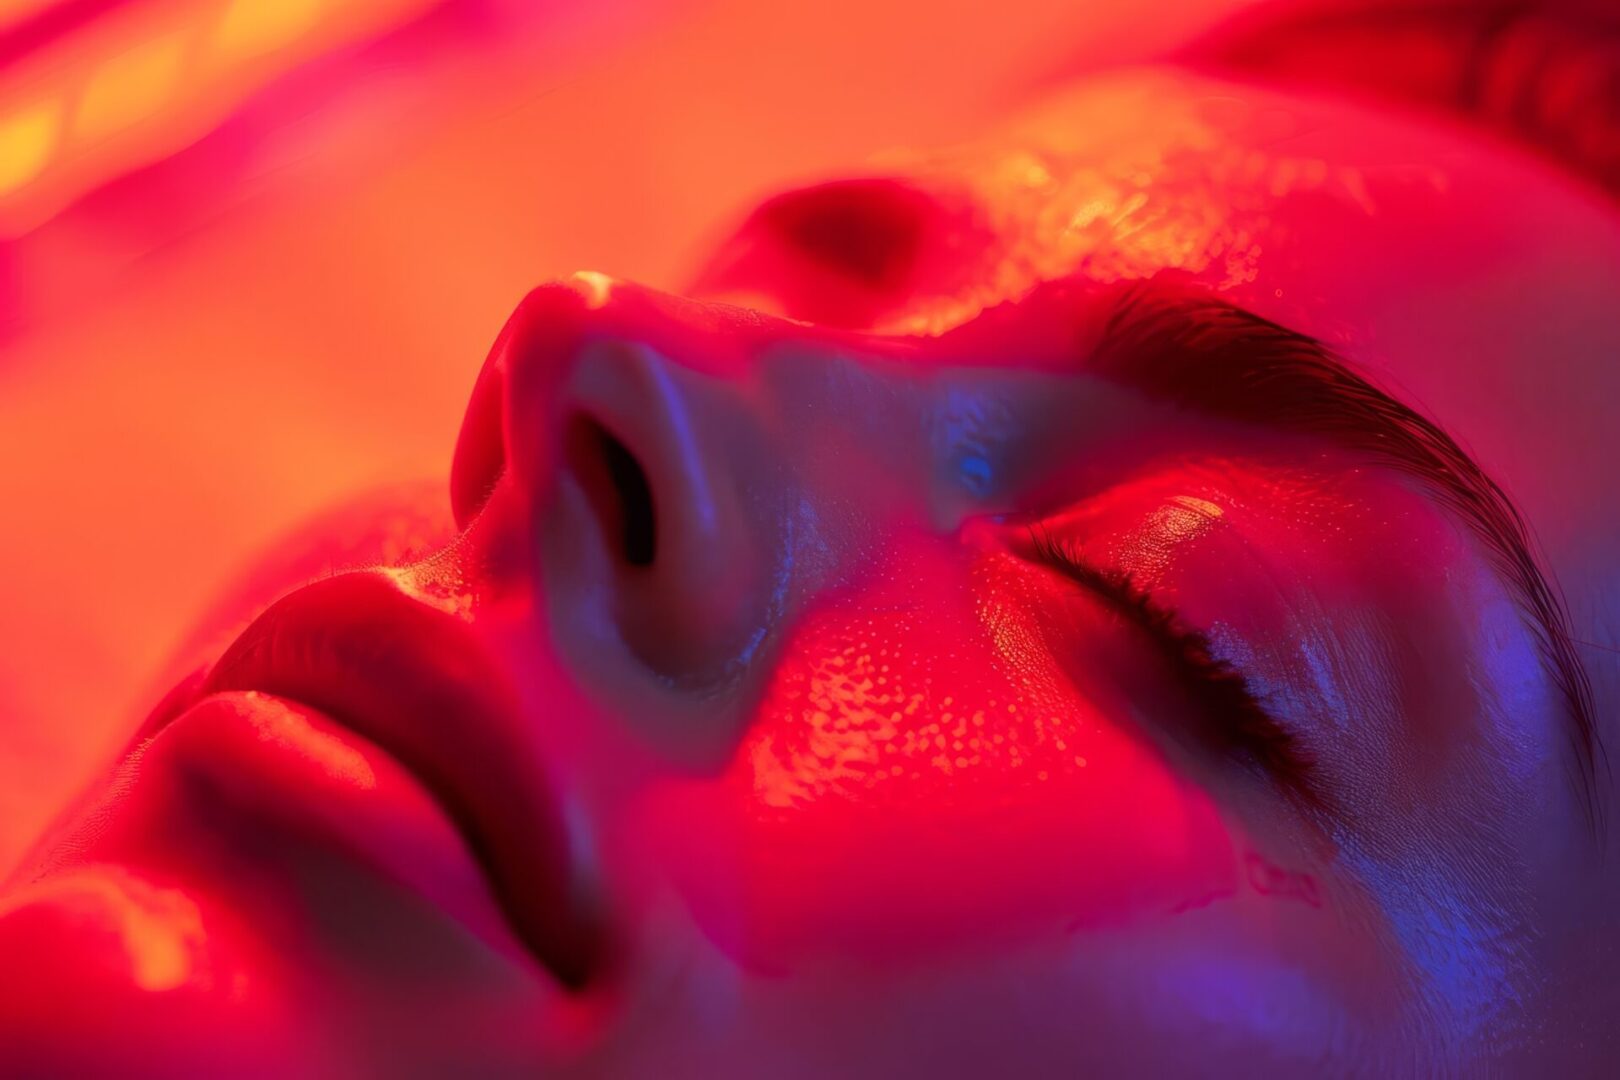 womans face illuminated by red light therapy glowing skin relaxation beauty treatment closeup photography